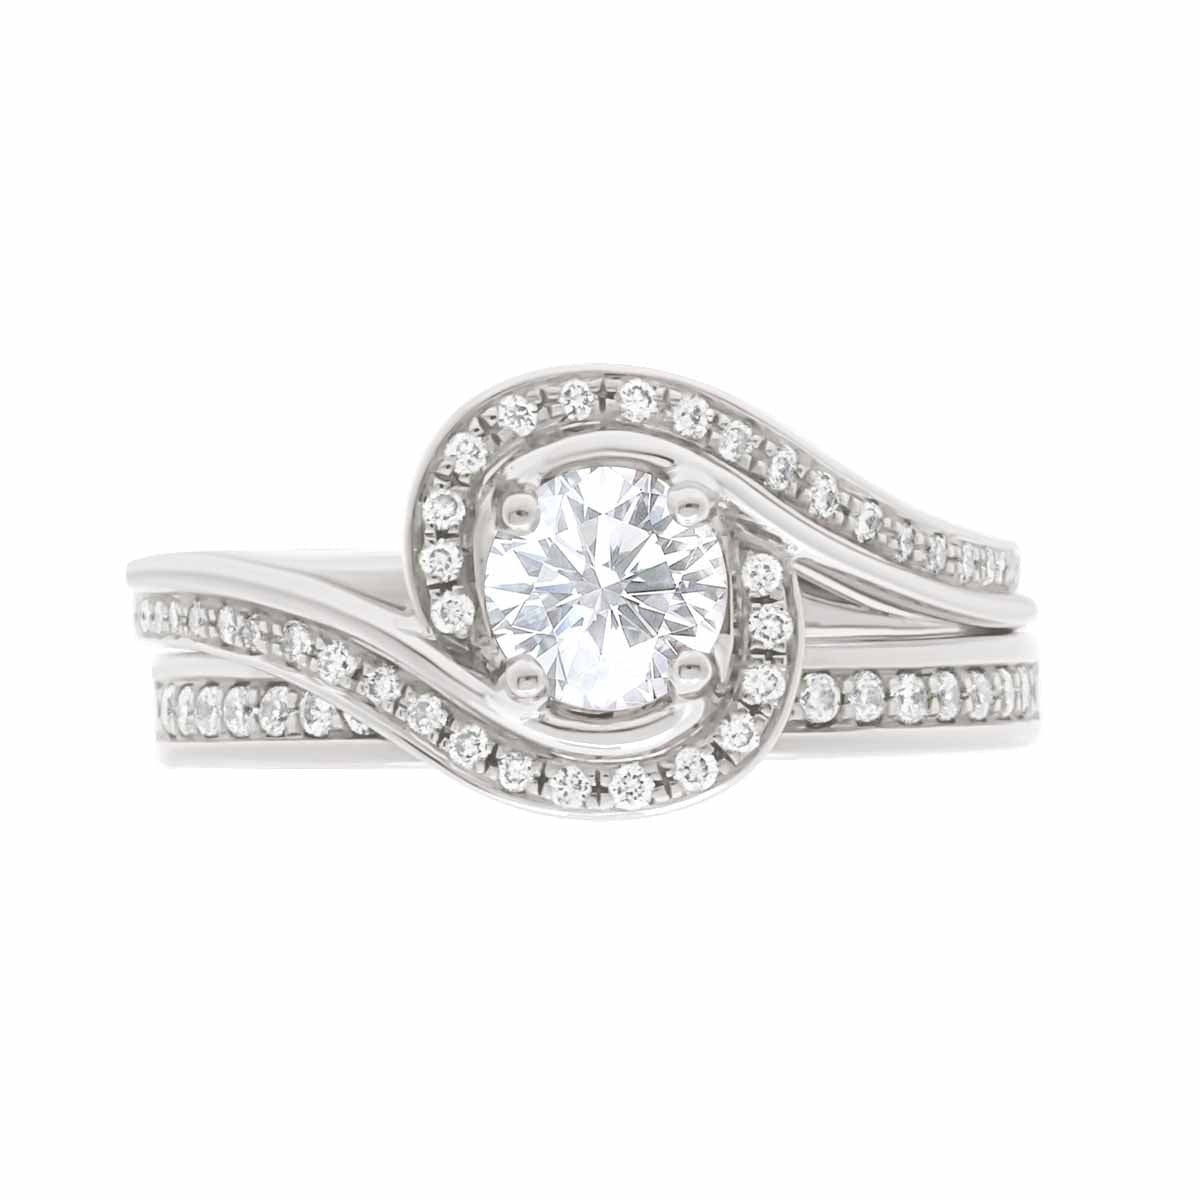 Contemporary Style Engagement Ring in white gold, with a matching diamond wedding ring, lying flat, with a white background